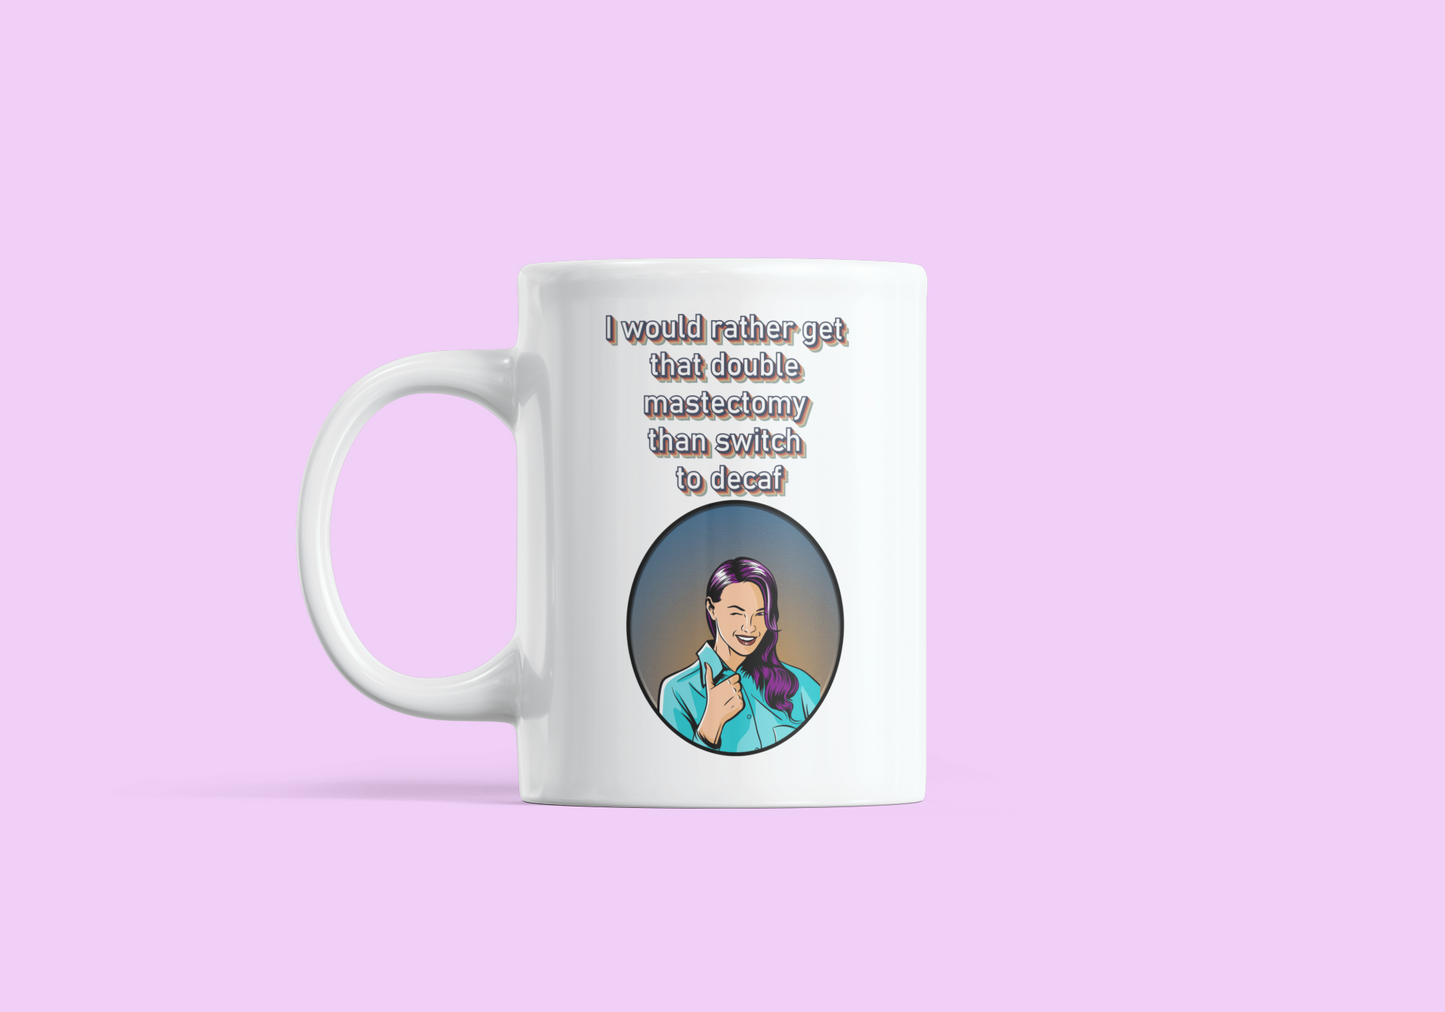 I would rather get that double mastectomy than switch to decaf adult mug birthday gift boyfriend gift Christmas gift co-worker gift coffee mug coworker gift custom mug dads day gift dishwasher safe mug fiance gift funny coffee mug funny mug gift for boyfriend gift for dad gift for grandpa gift for her gift for him gift for husband gift for mom gift for sister gift for wife gift idea girlfriend gift Husband Gift moms gift mothers day gift mug school gift sports teacher gift Unique gift wife gift